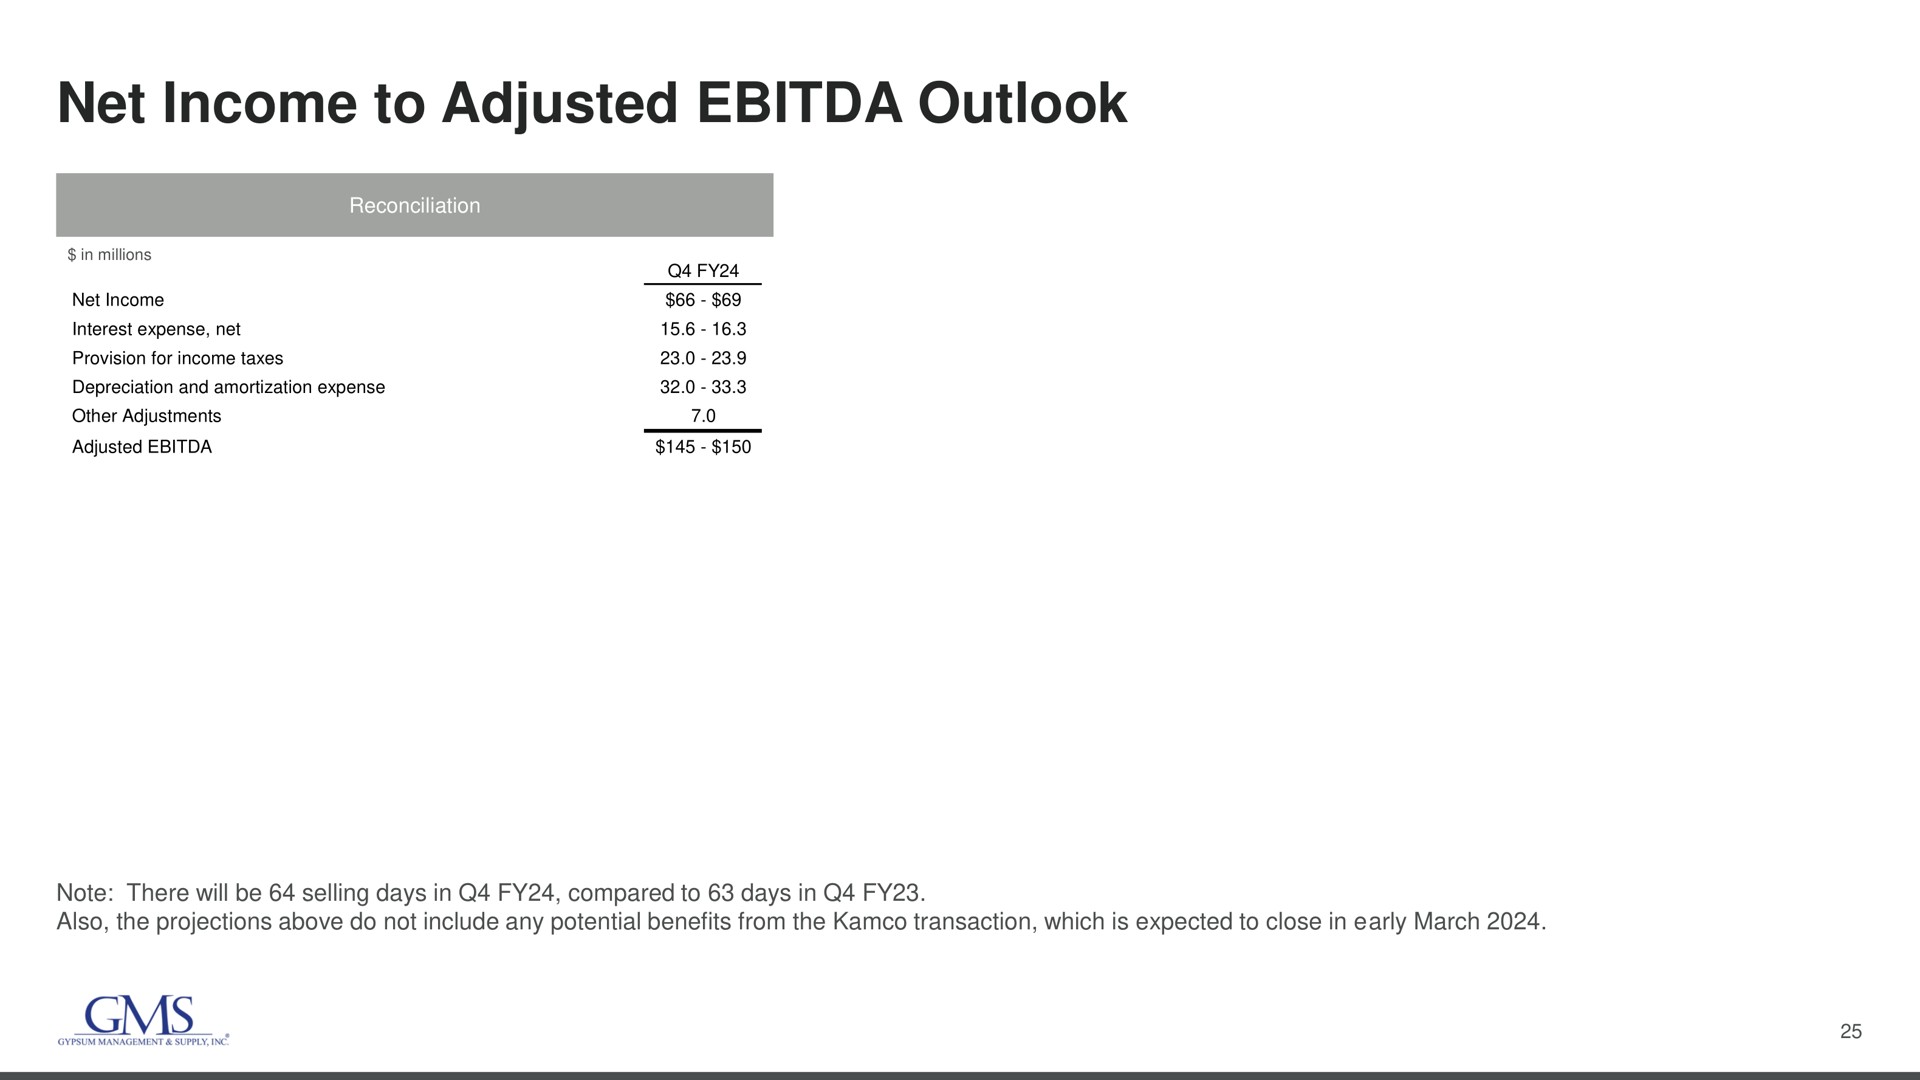 net income to adjusted outlook | GMS